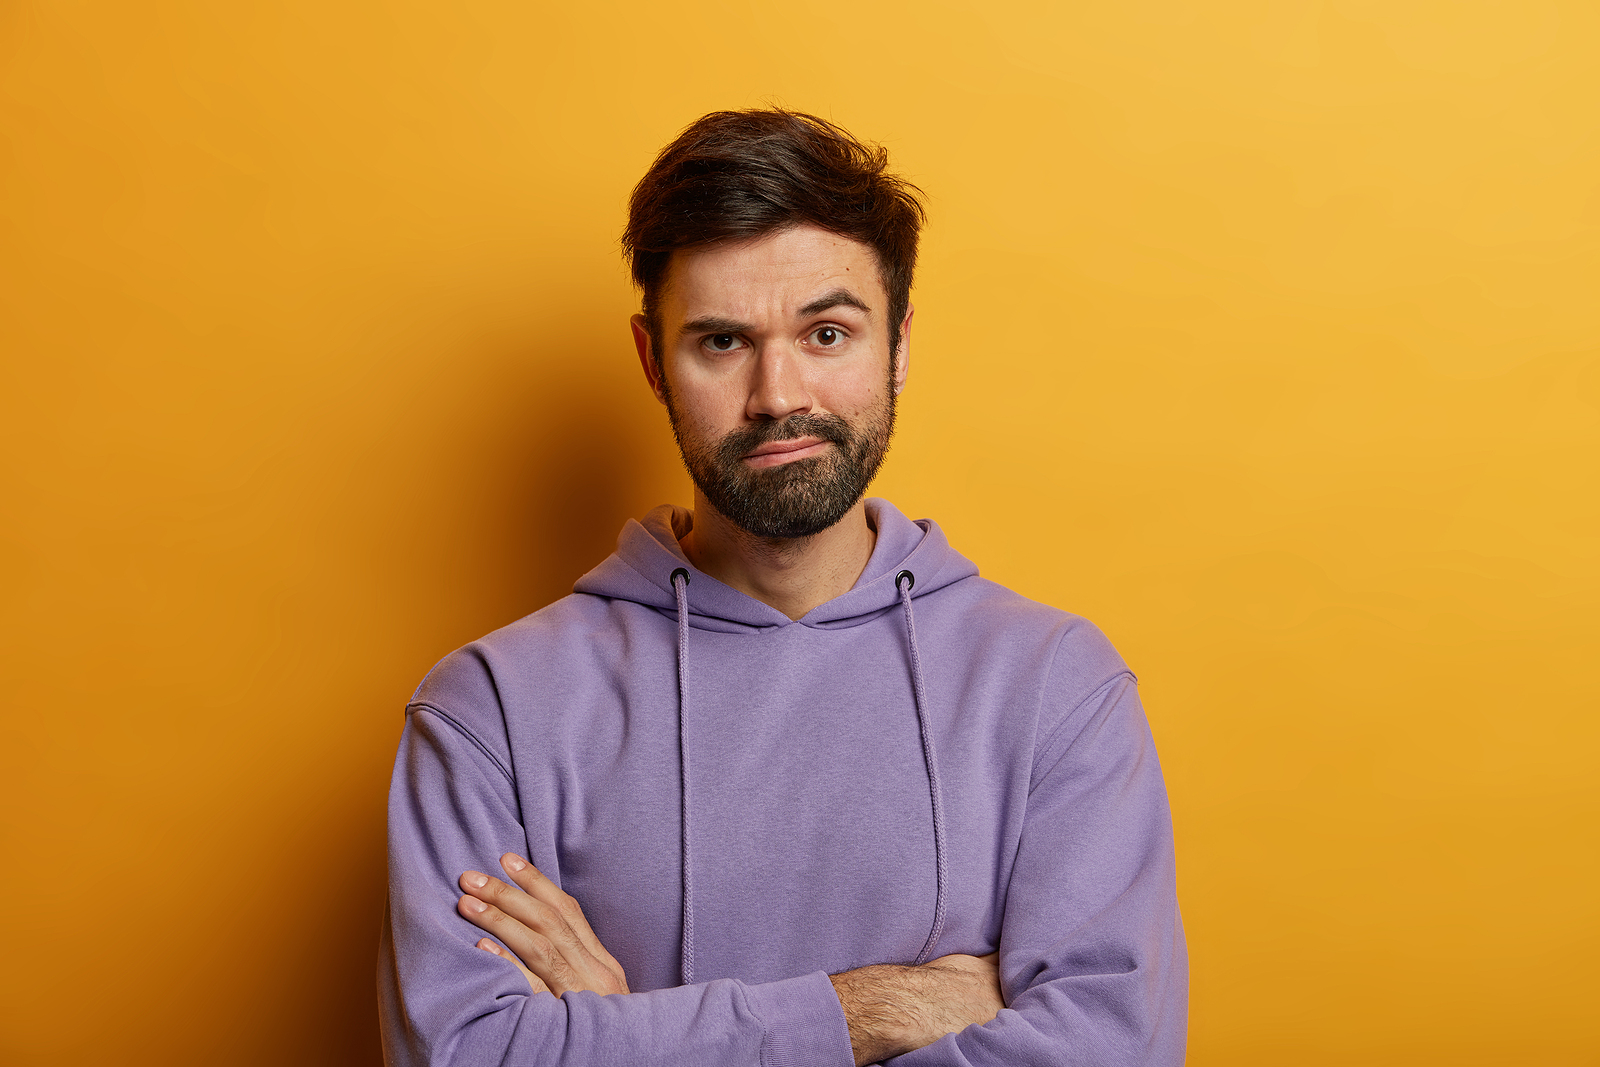 Image of an attractive caucasian man wearing a purple shirt against a plain yellow background, with his arms crossed and an annoyed expression on his face.